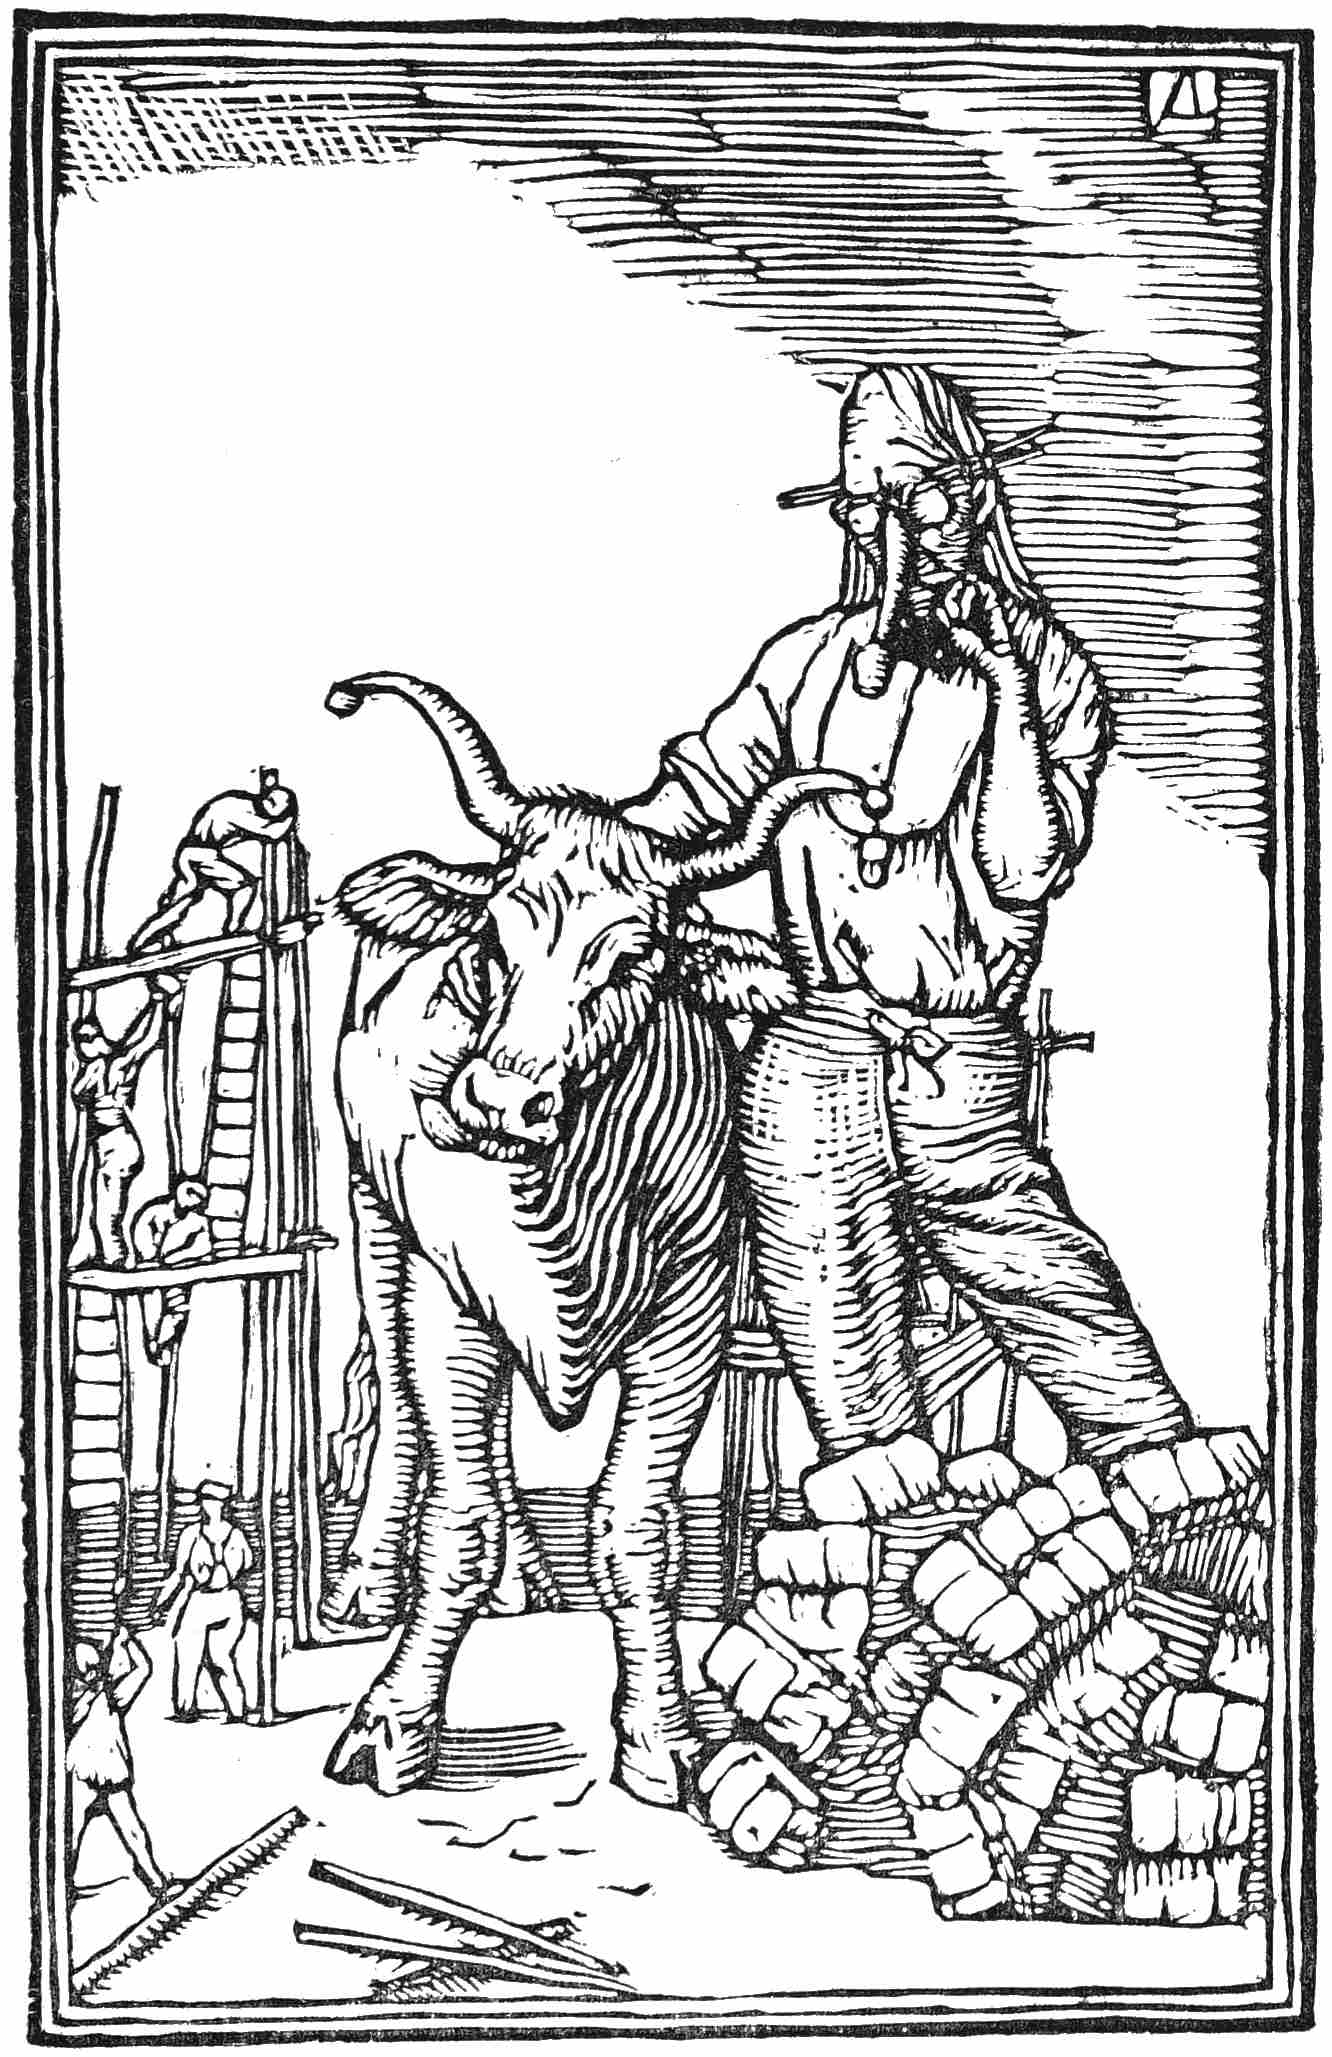 Man with pipe petting ox